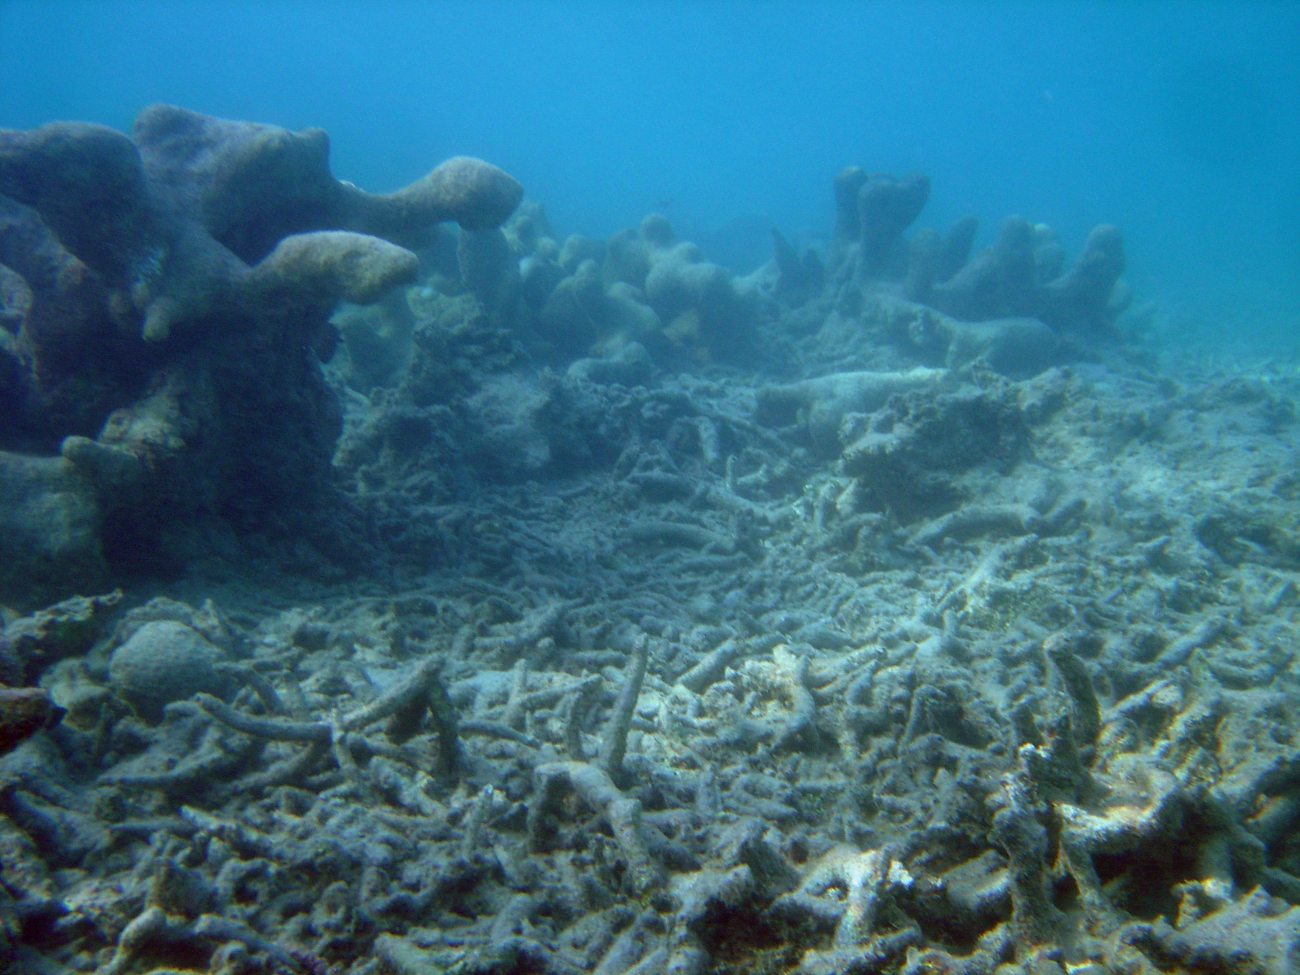 A dead coral reef